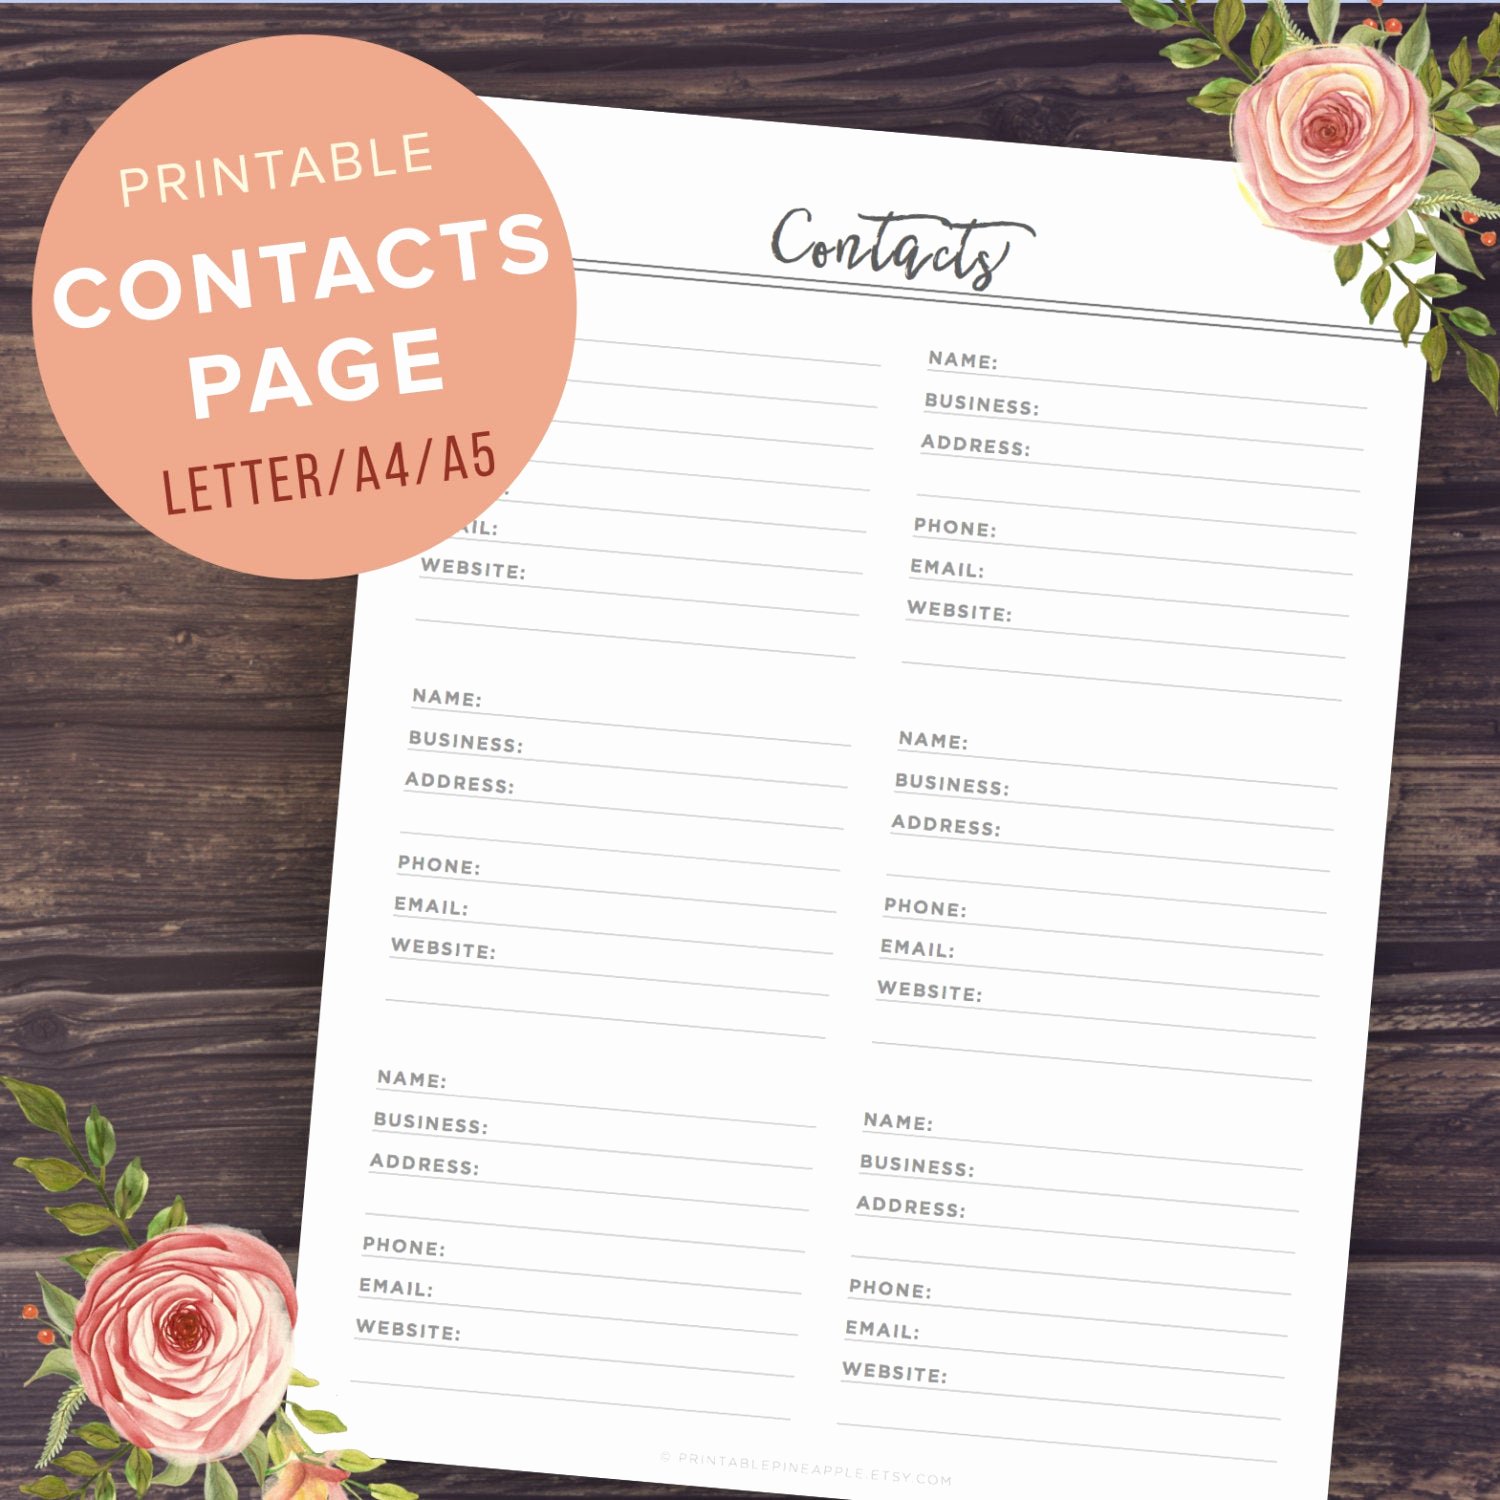 Printable Phone Book Best Of Contact Page Address Book Printable Phone Numbers A5 A4